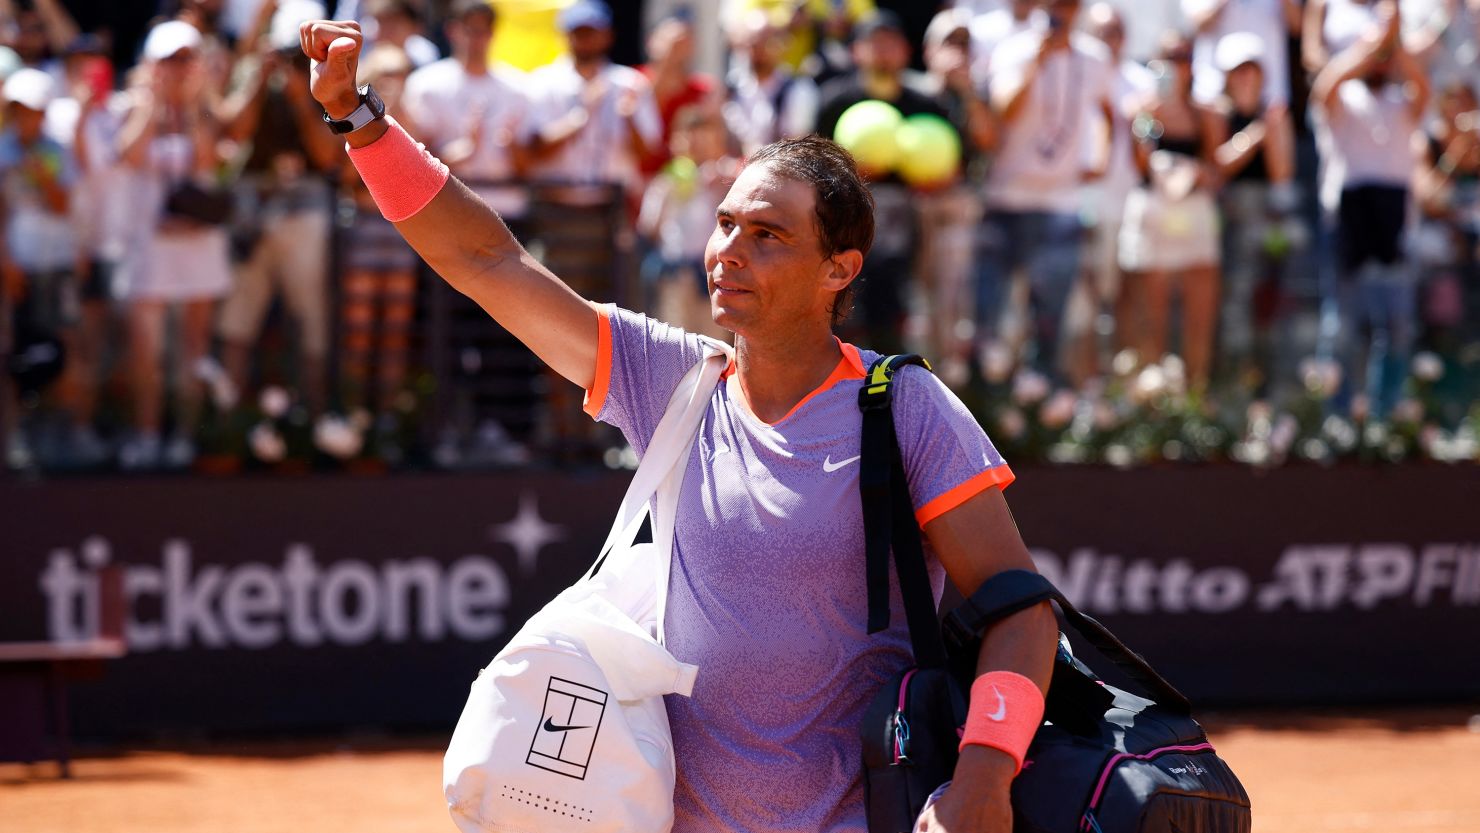 Rafael Nadal waves to the crowd after his second-round defeat at the Italian Open.